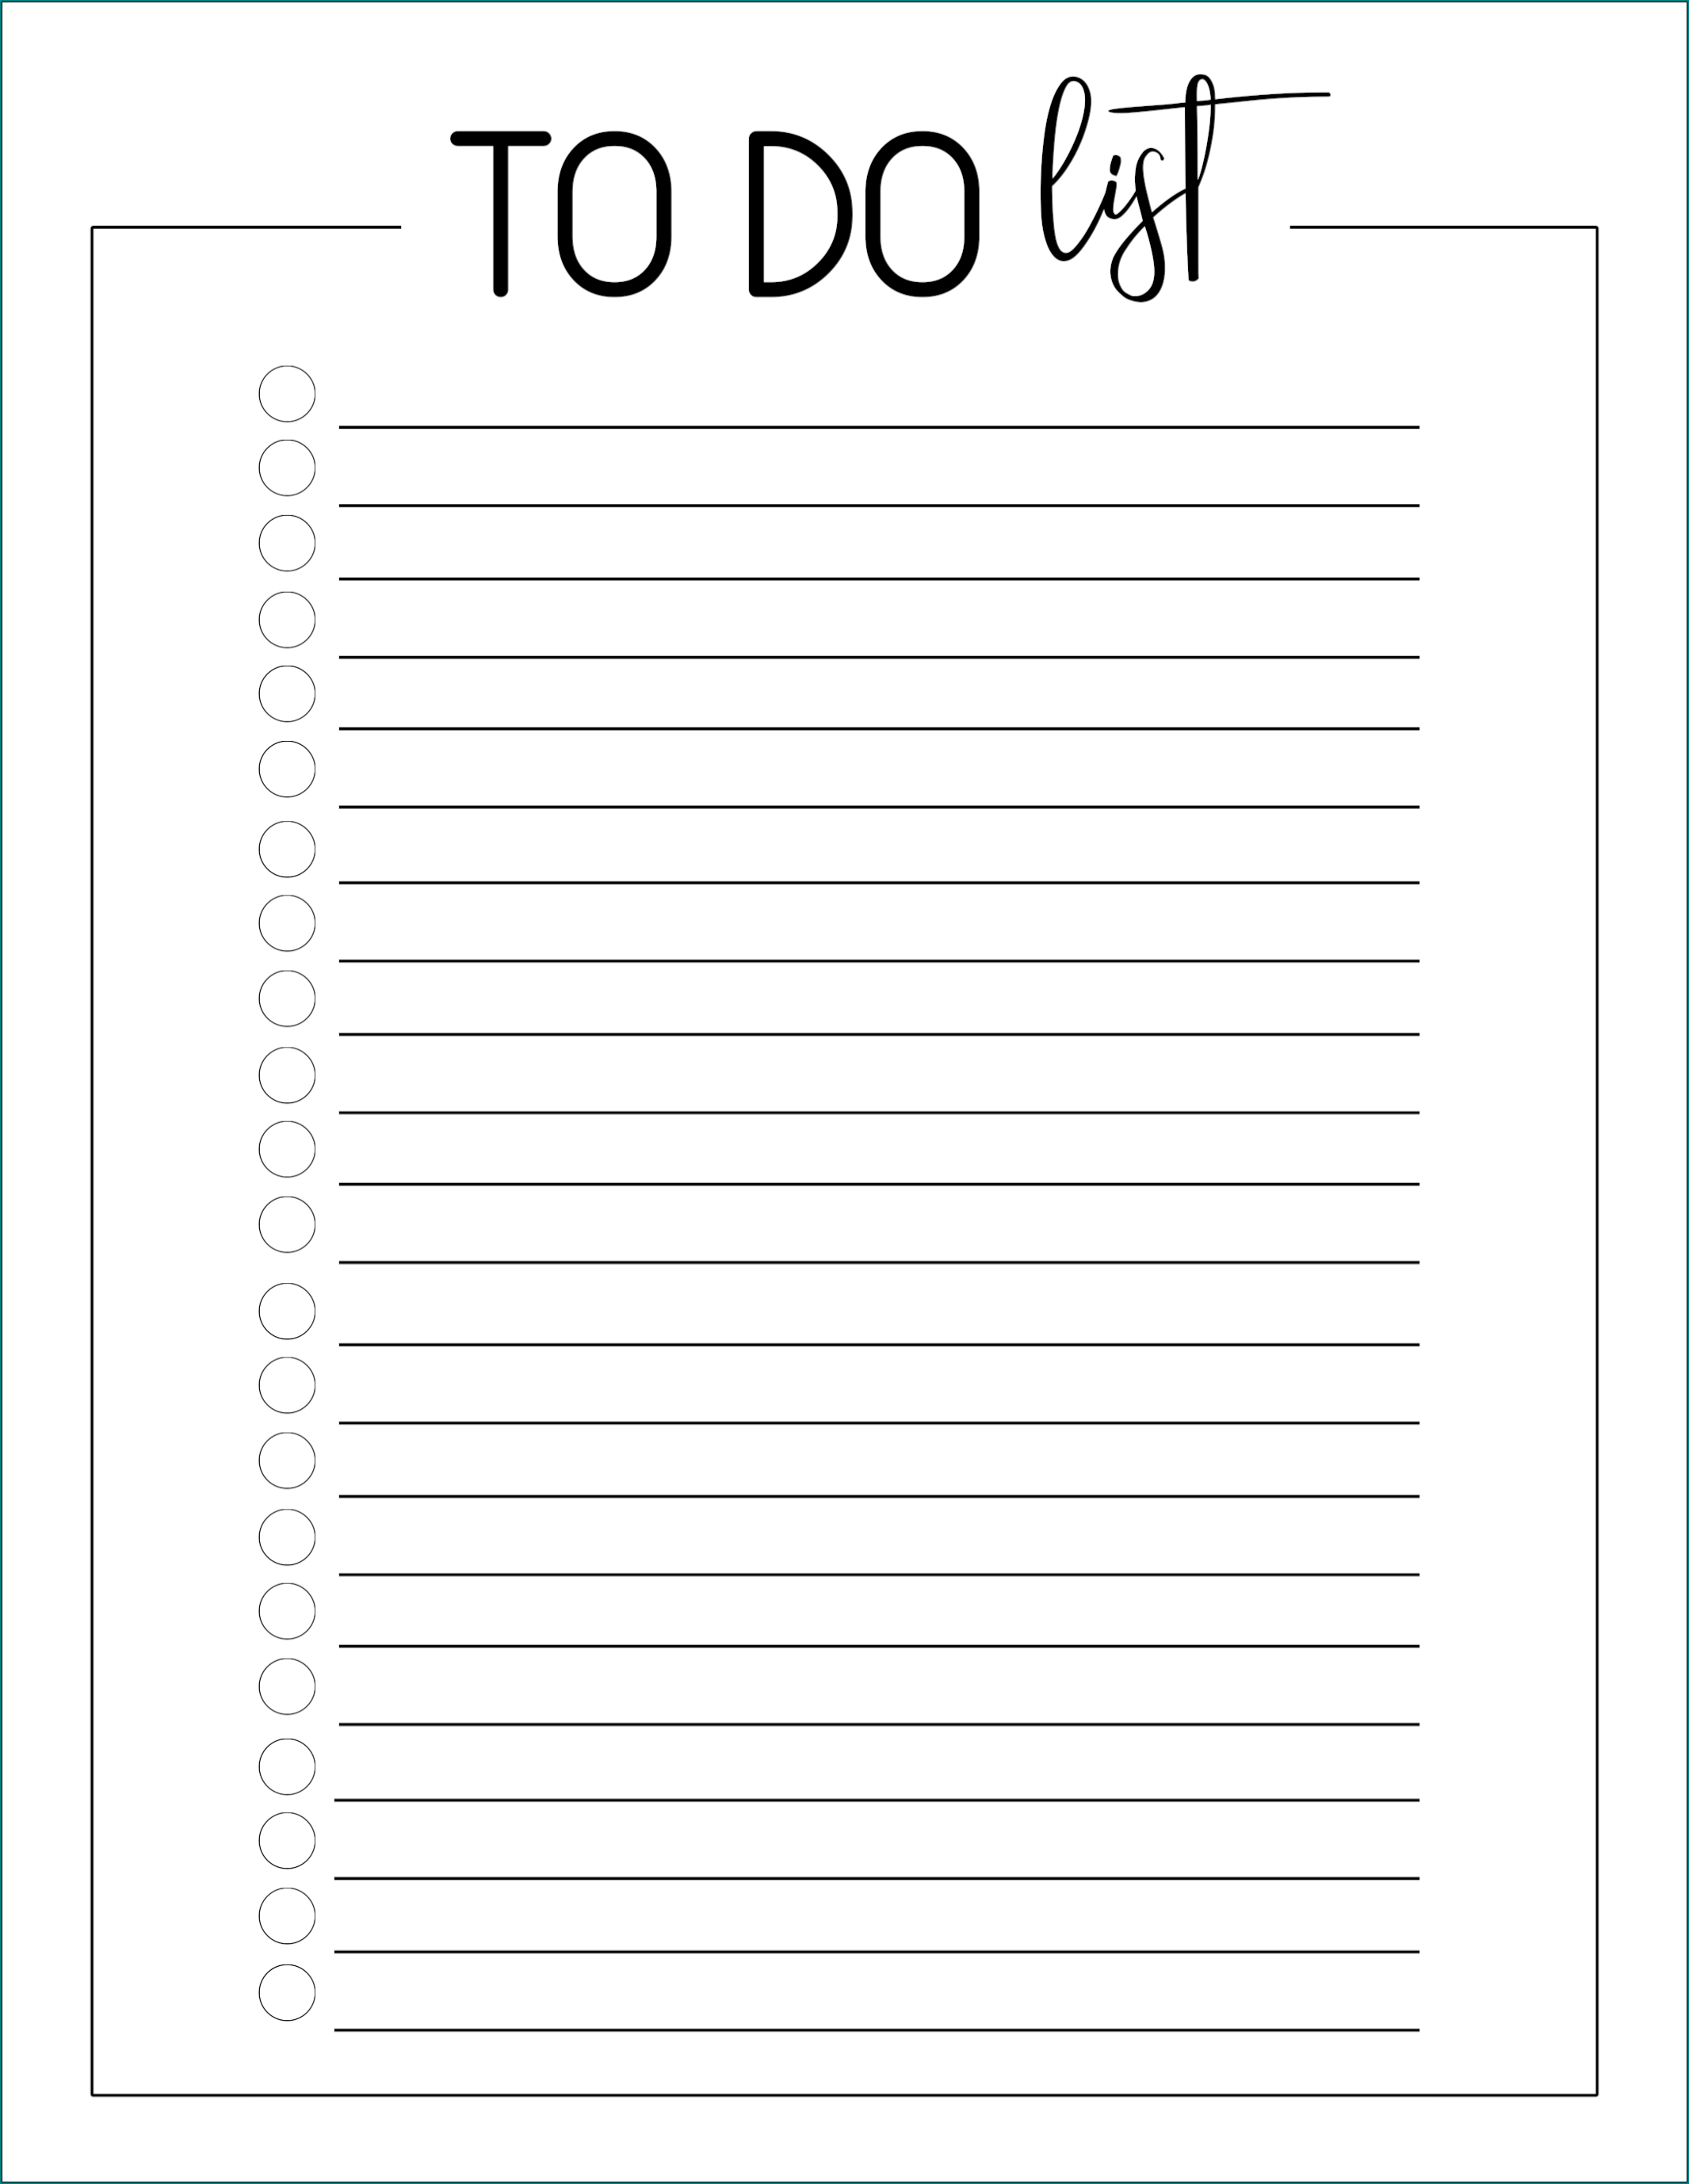 free todo list template